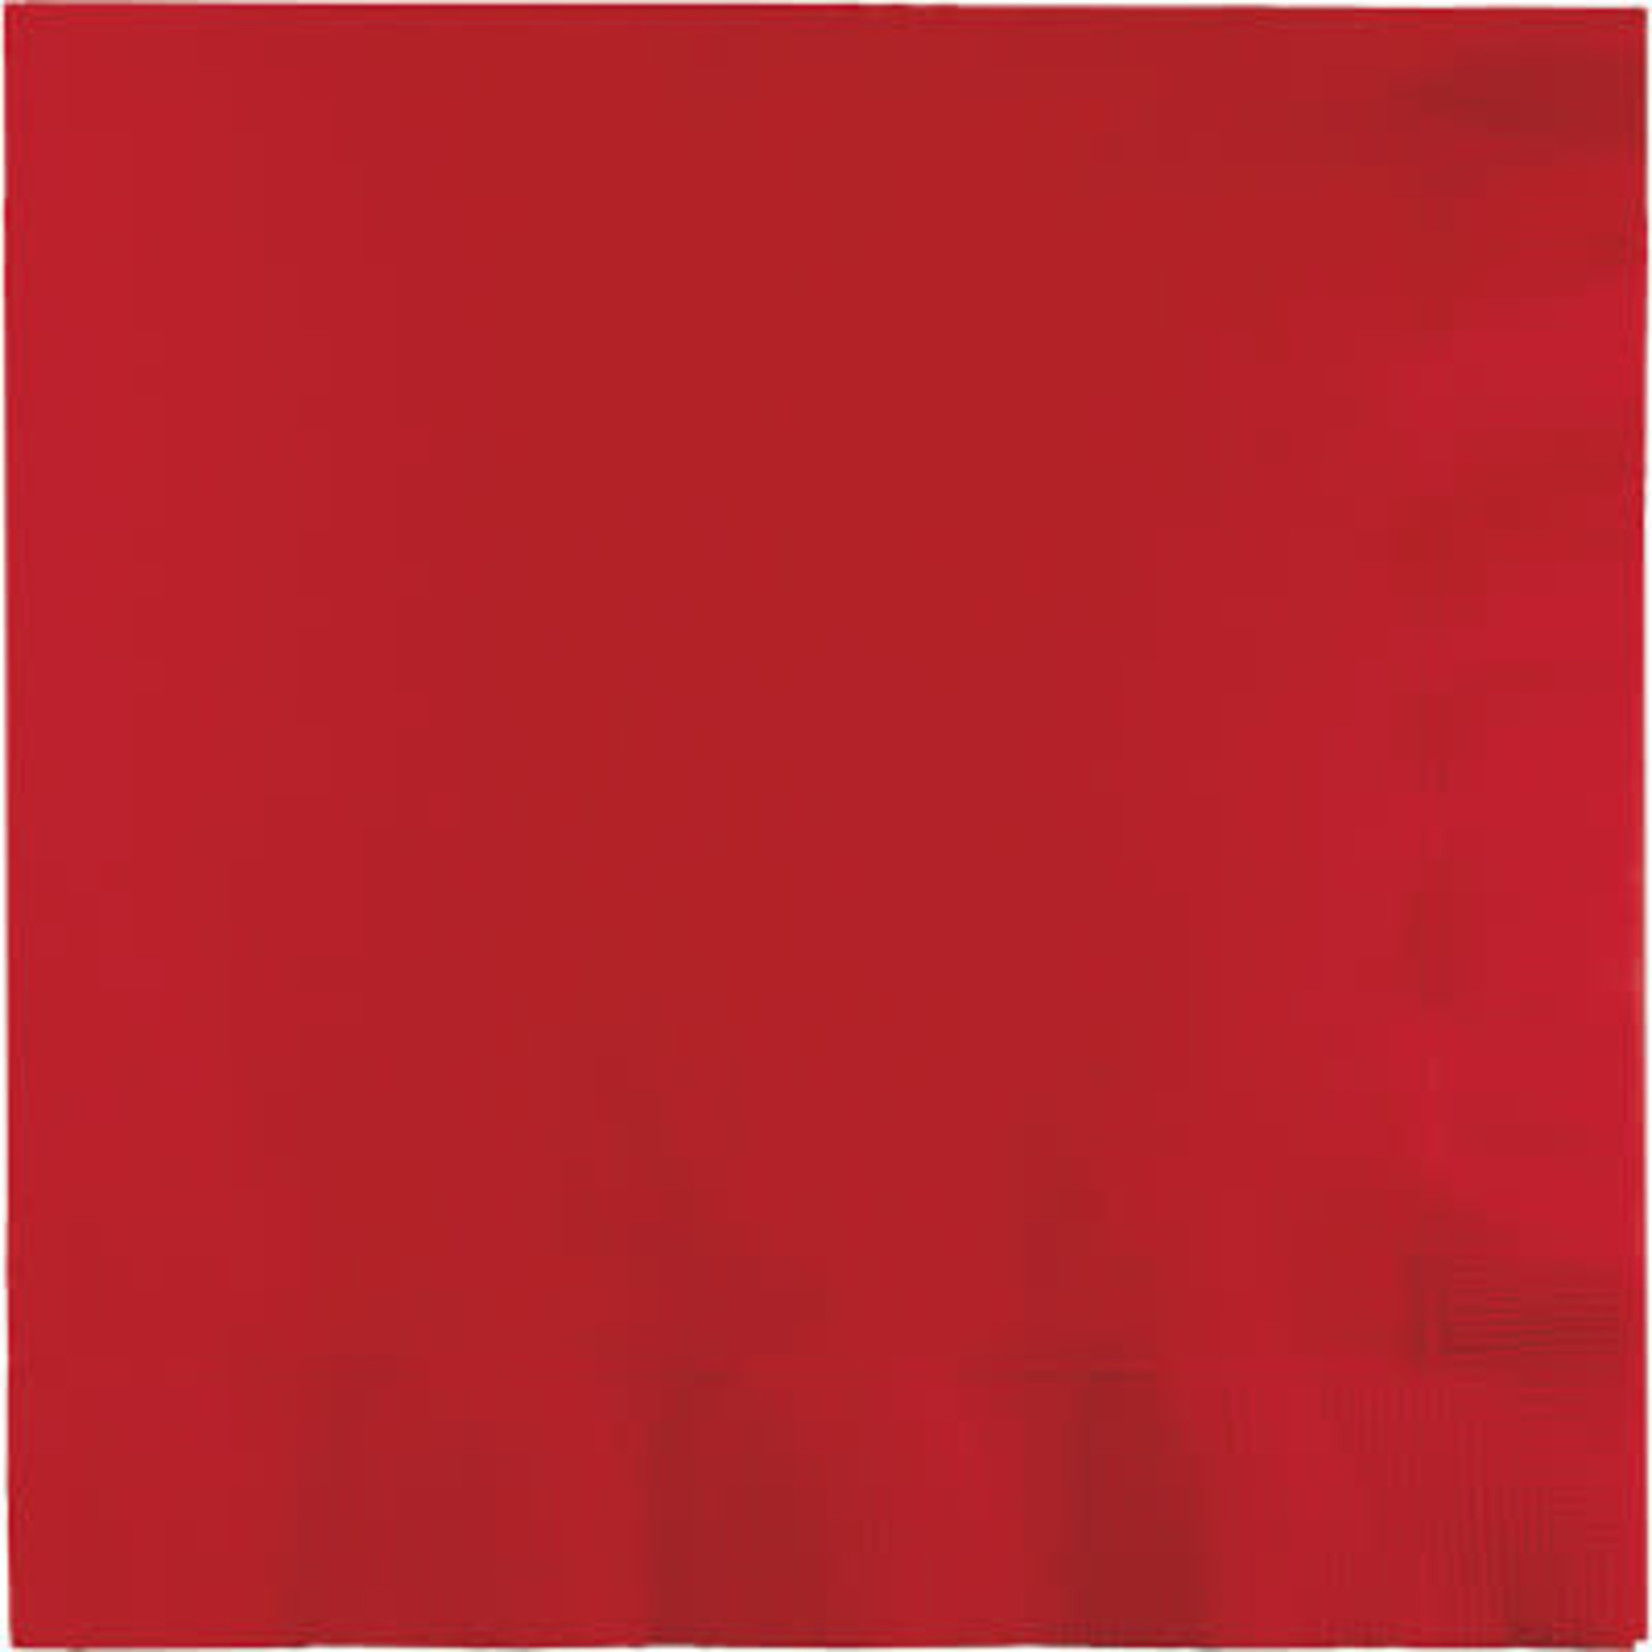 Touch of Color Classic Red 2-Ply Lunch Napkins - 50ct.